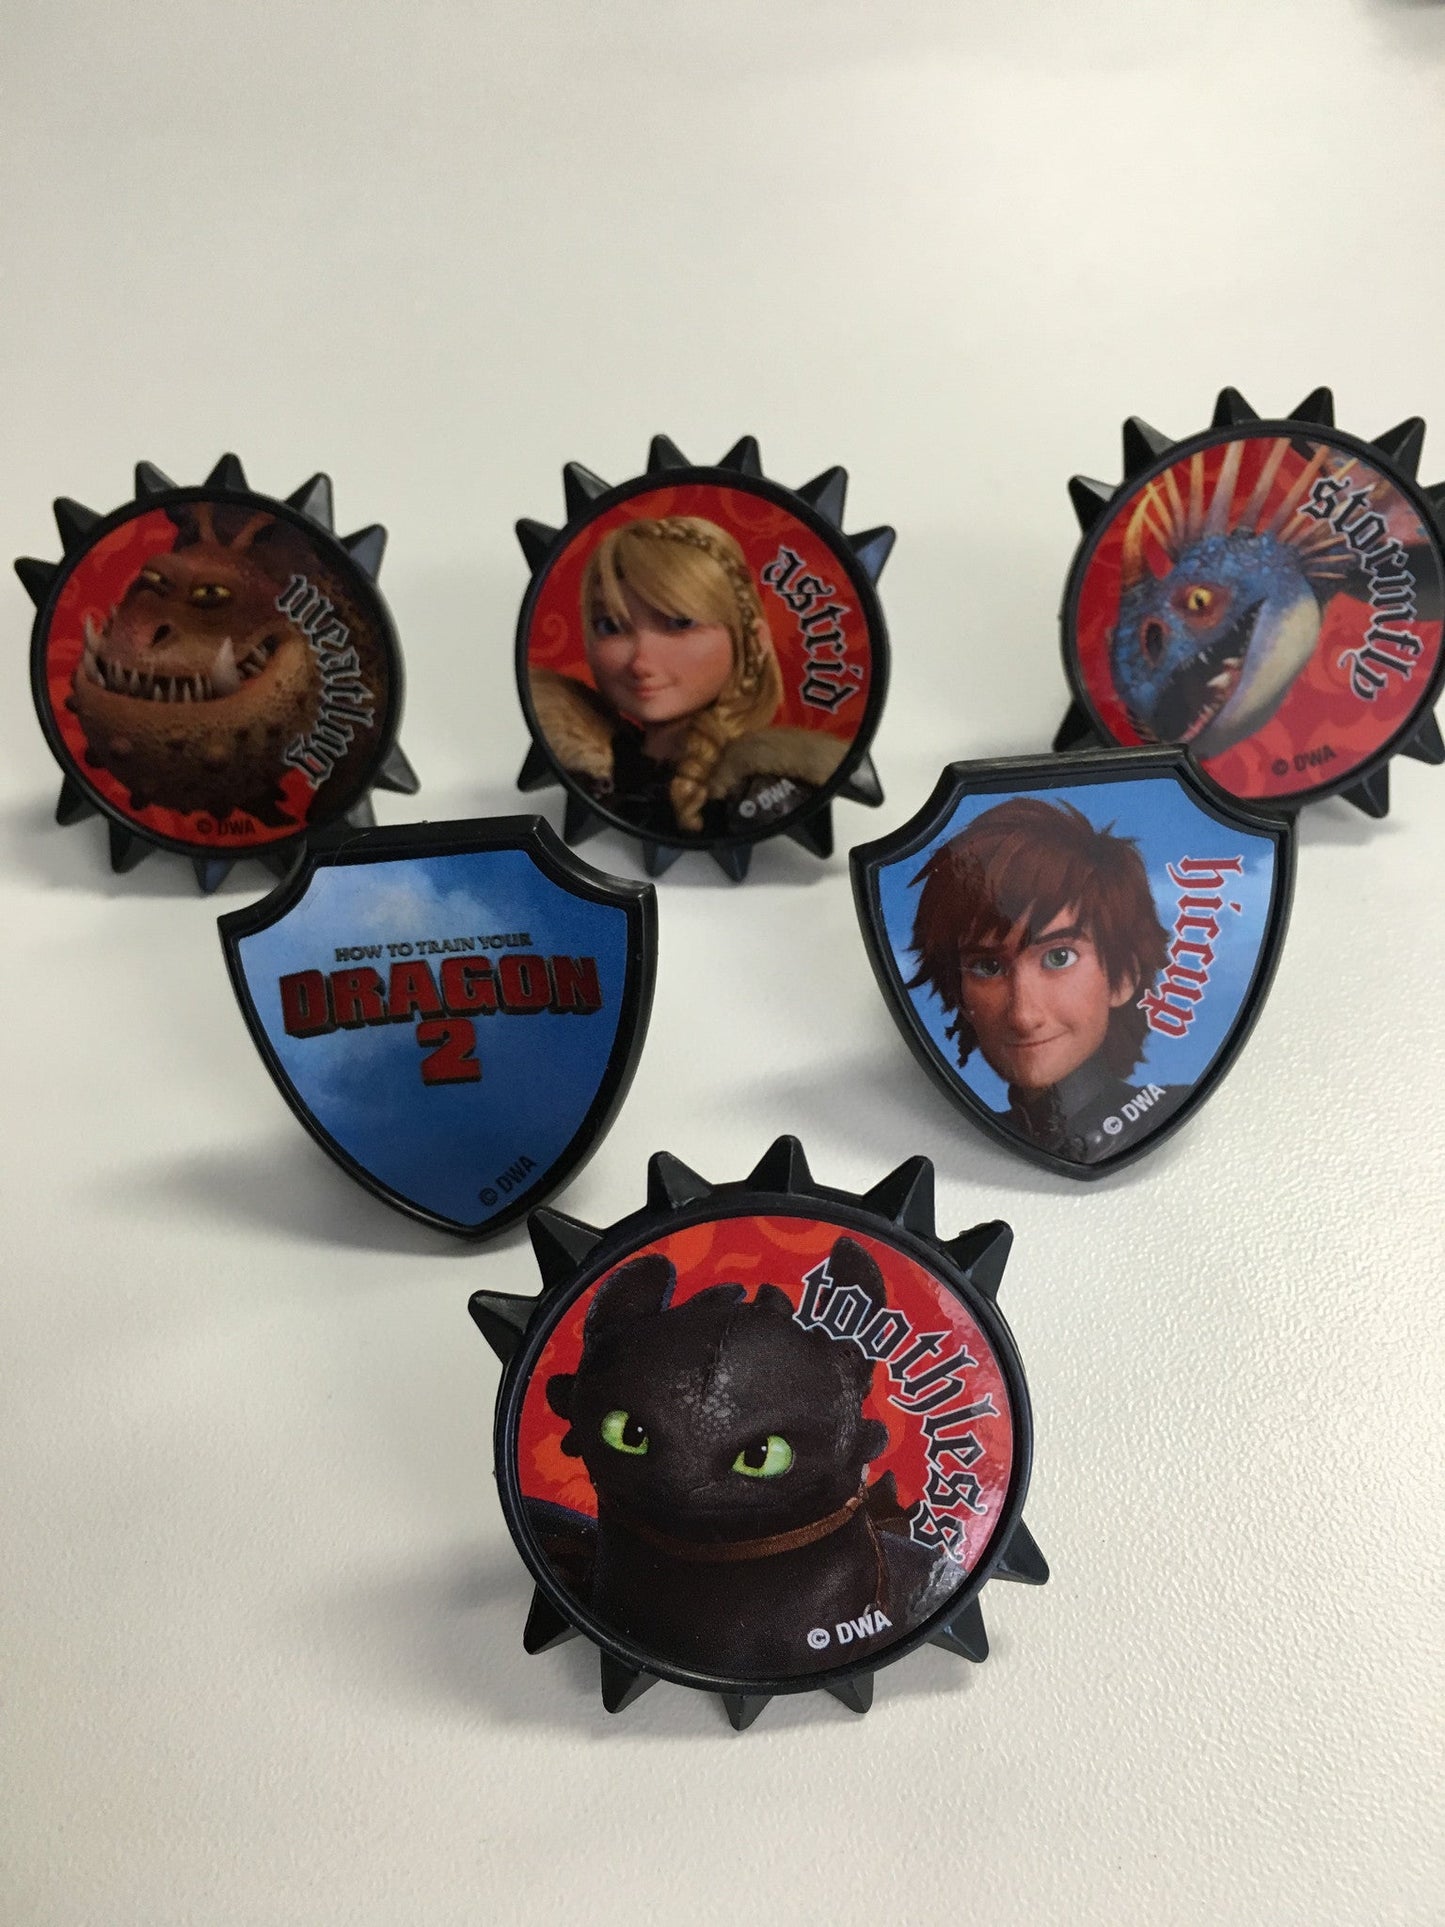 How to Train Your Dragon 2 Rings